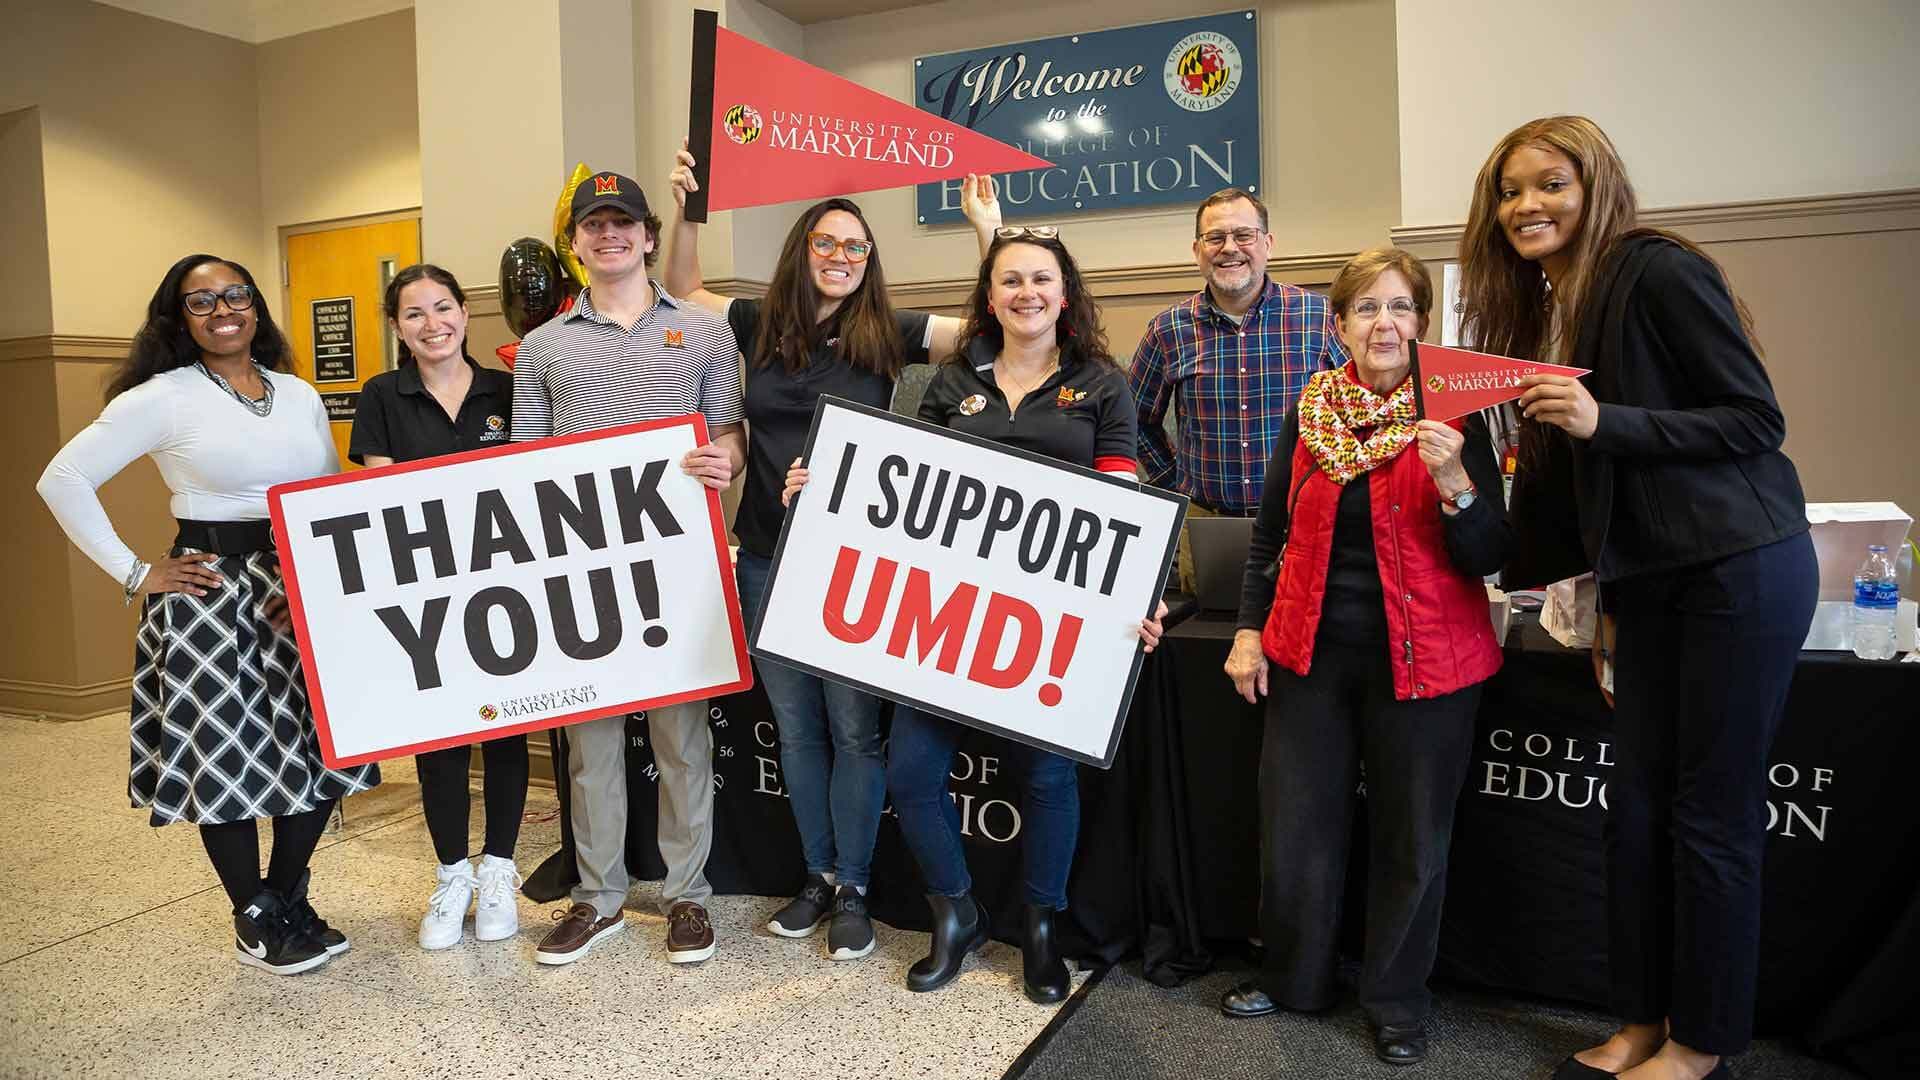 People hold "Thank you!" and "I support UMD!" signs and a UMD pennant